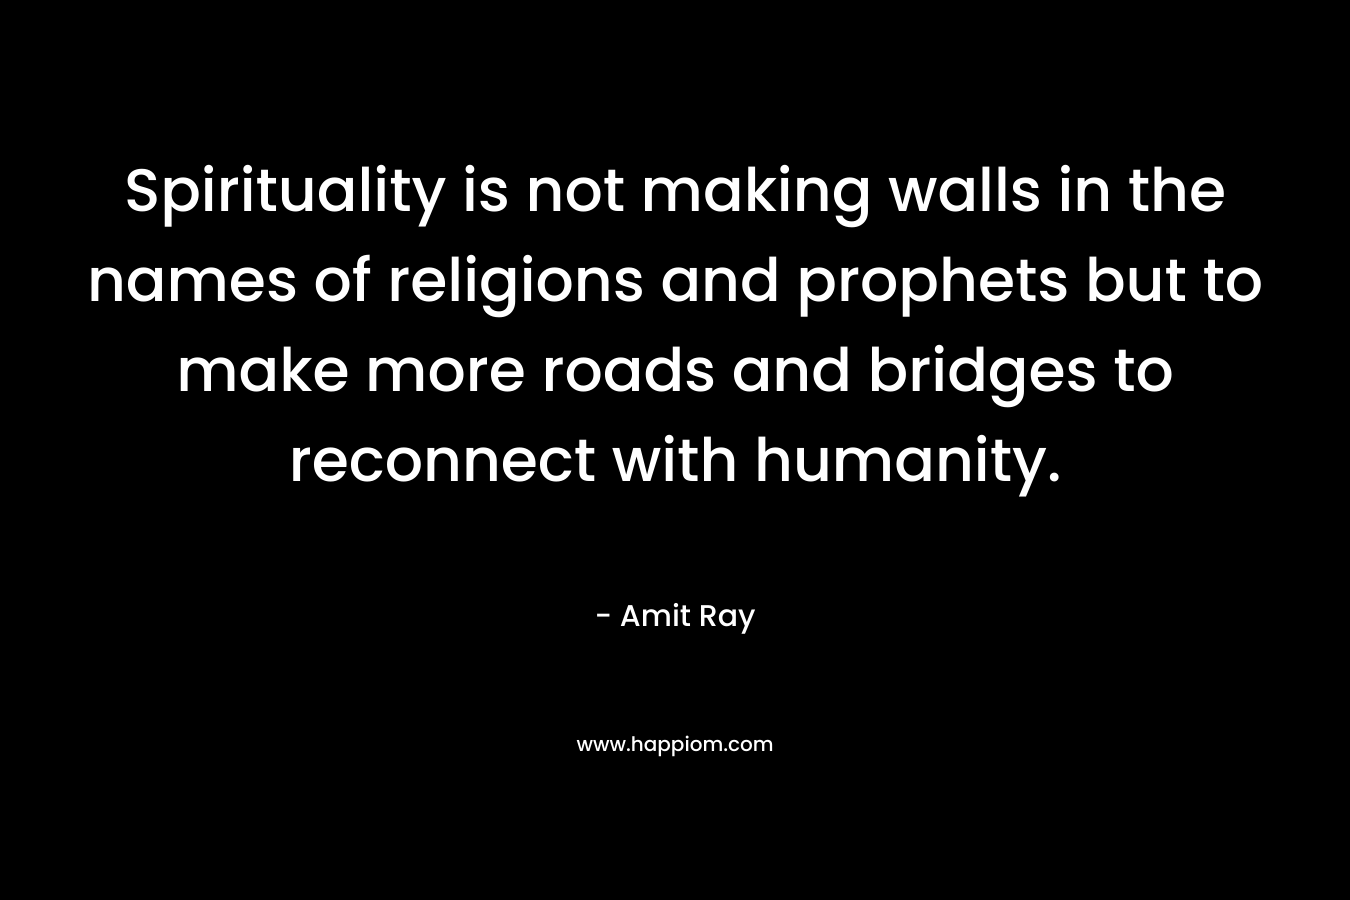 Spirituality is not making walls in the names of religions and prophets but to make more roads and bridges to reconnect with humanity.